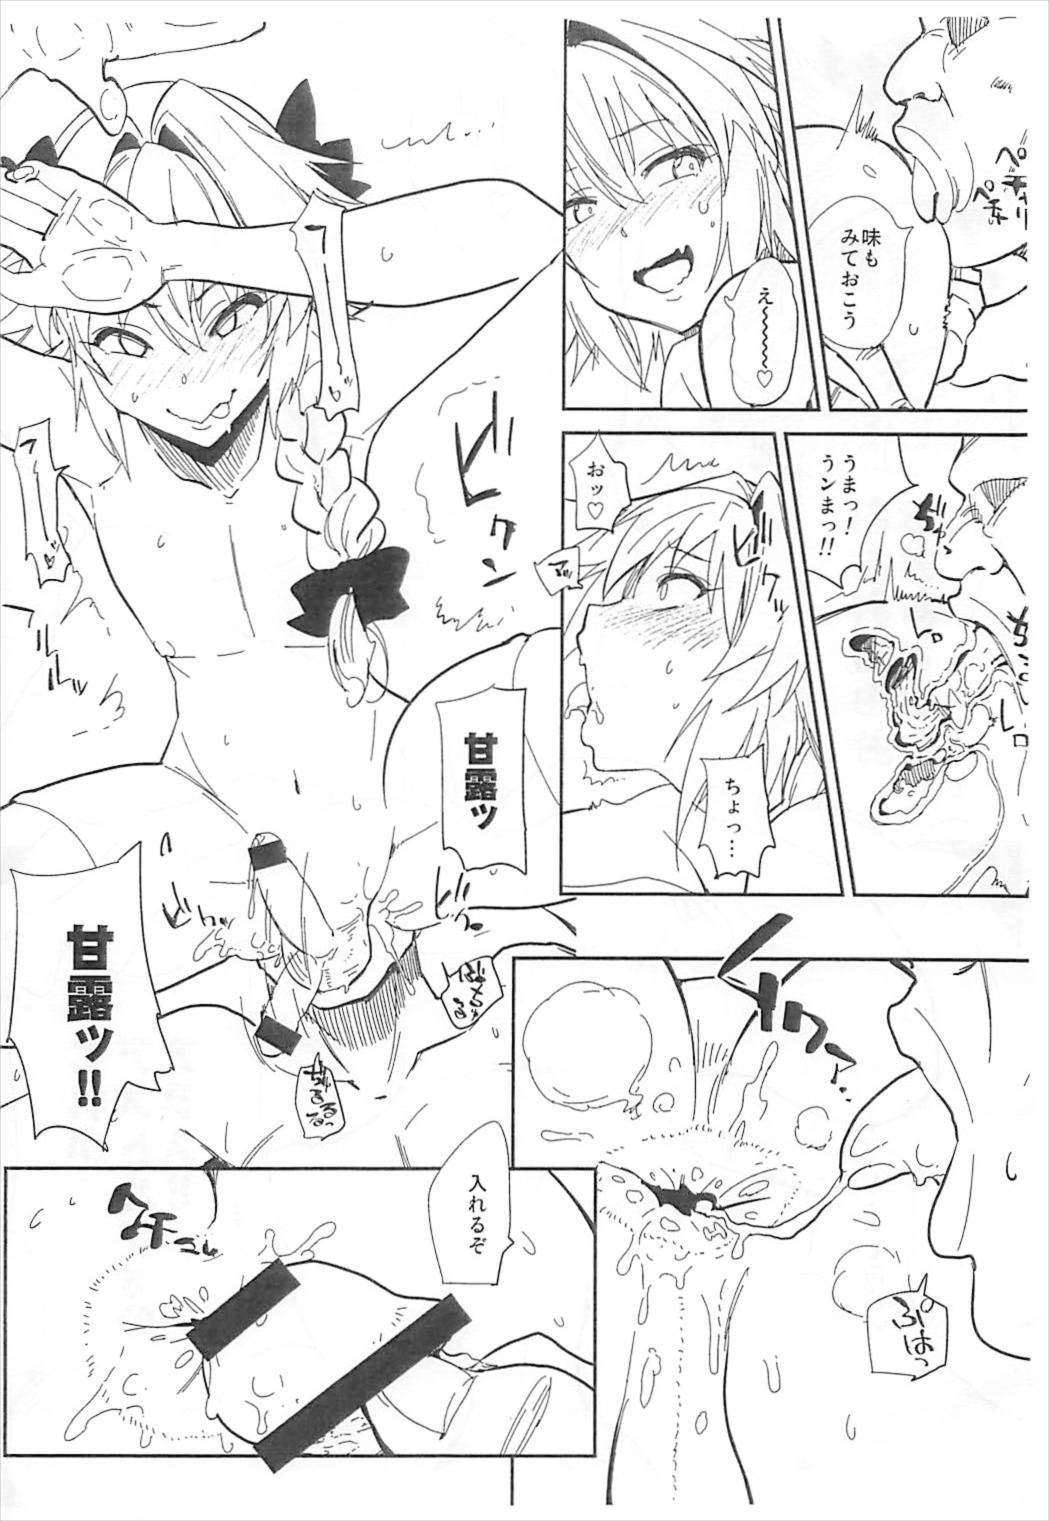 Transsexual 5000 Chou QP Hoshii - Fate grand order Pete - Page 5